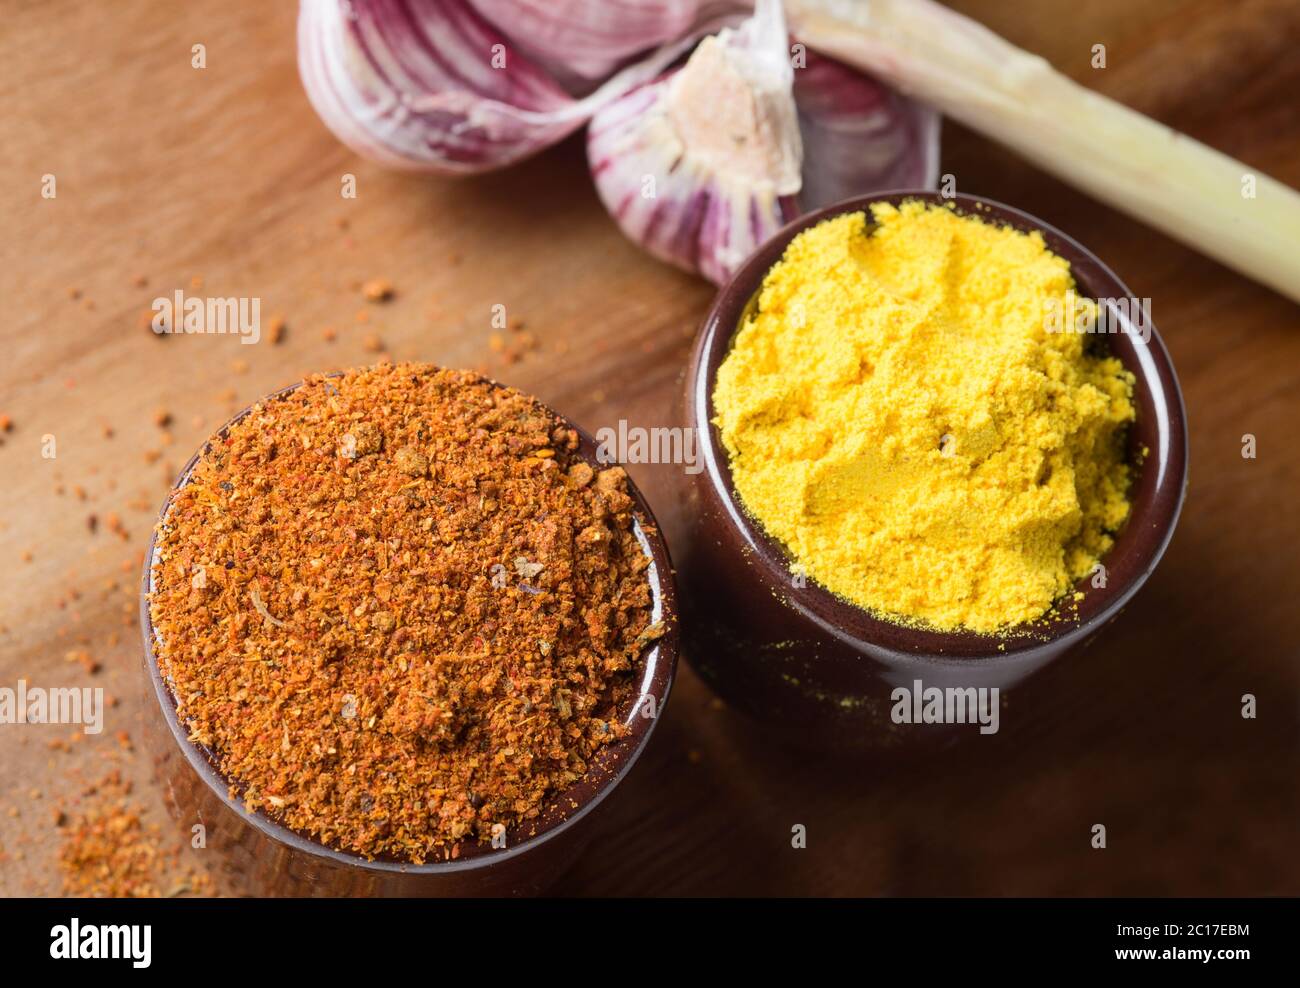 Spices and herbs in ceramic bowls. Food and cuisine ingredients. Colorful natural additives. Stock Photo